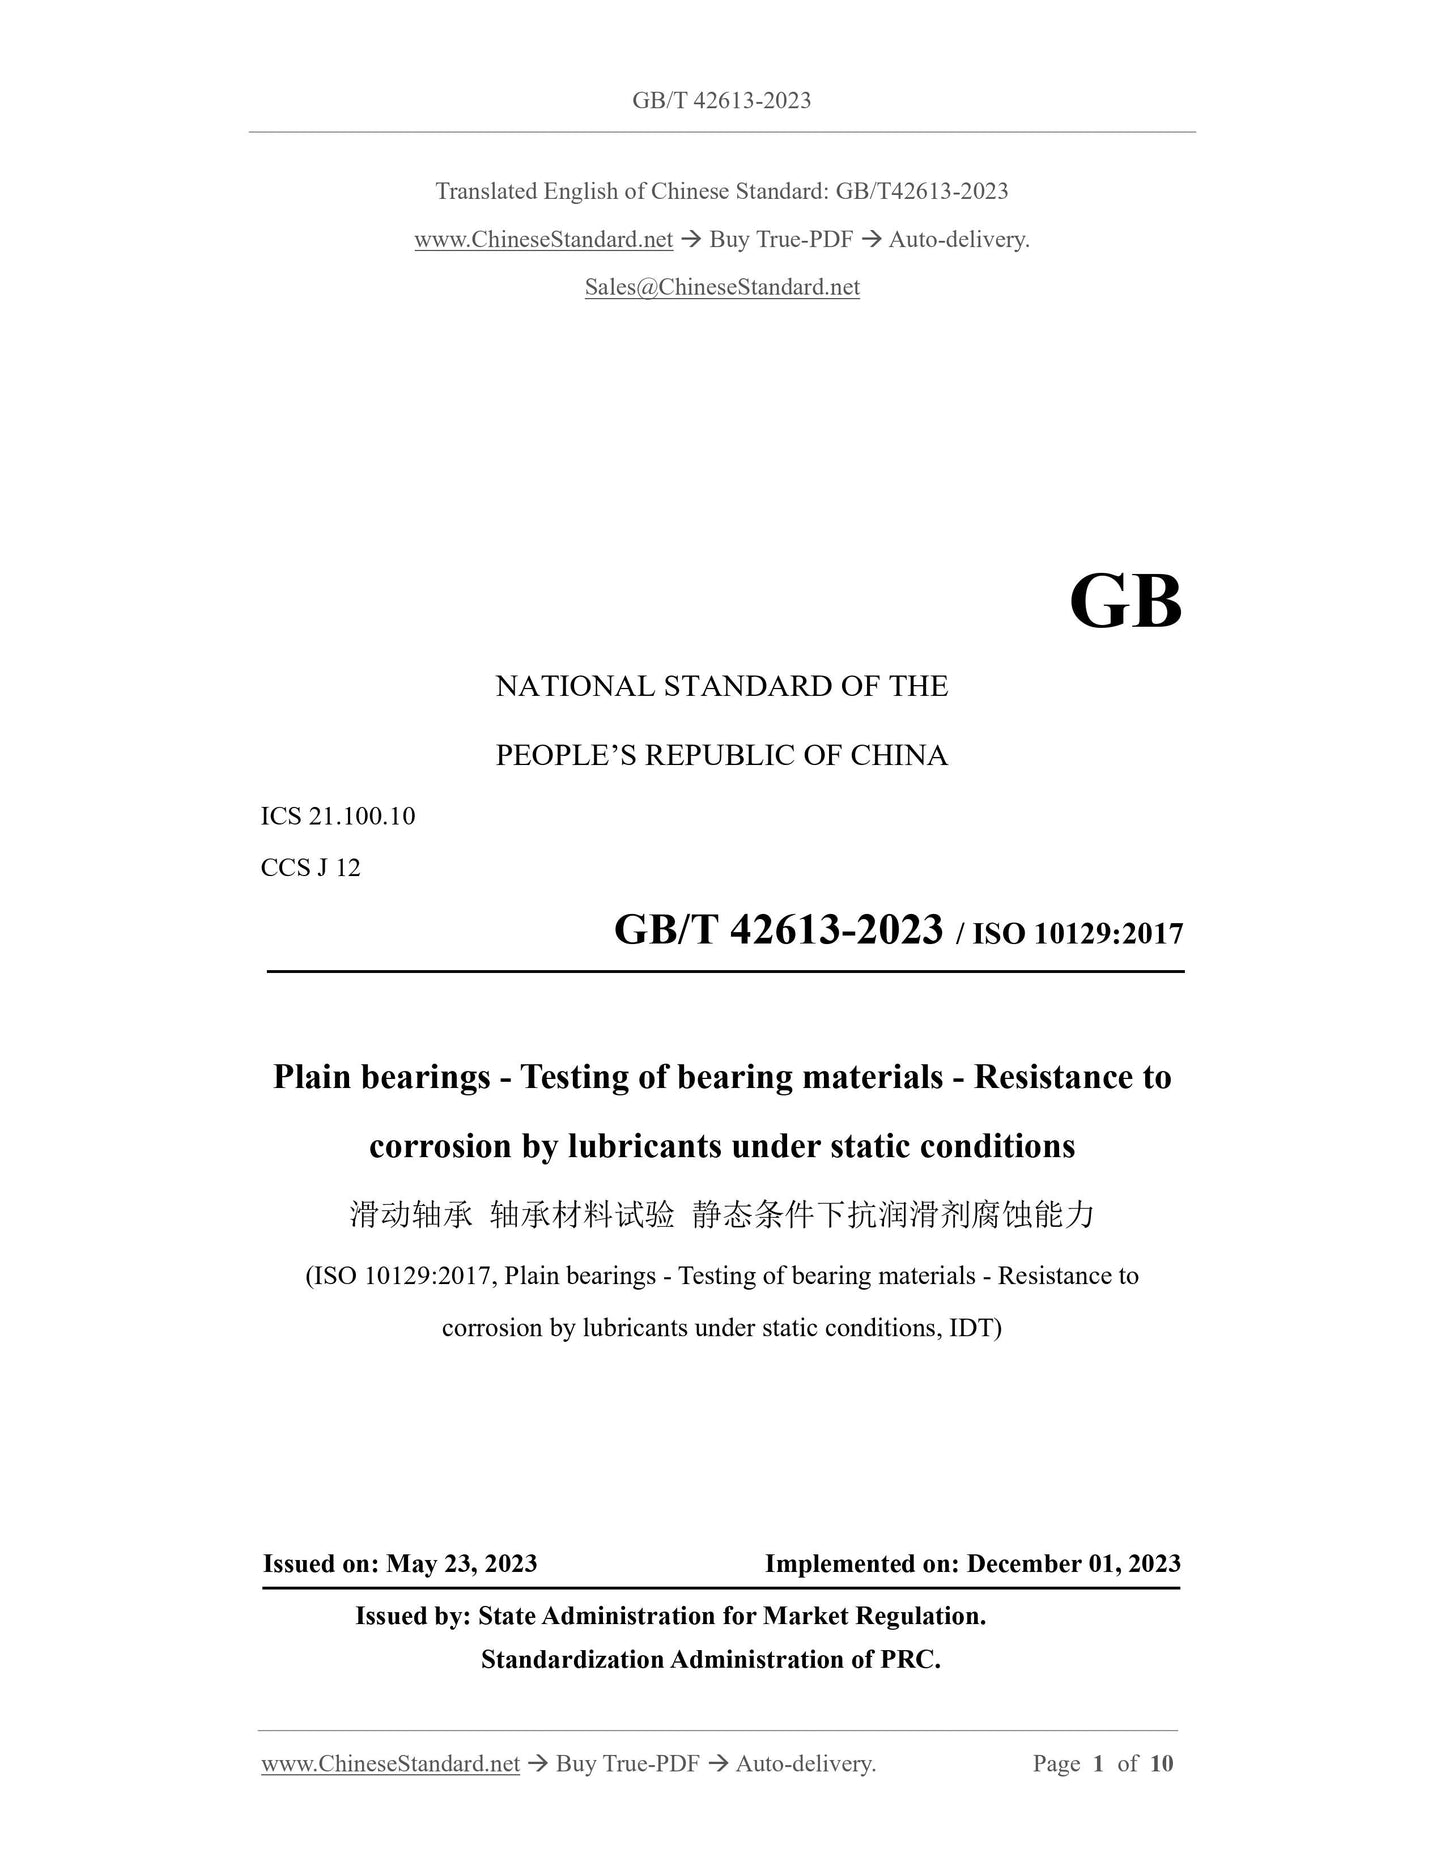 GB/T 42613-2023 Page 1